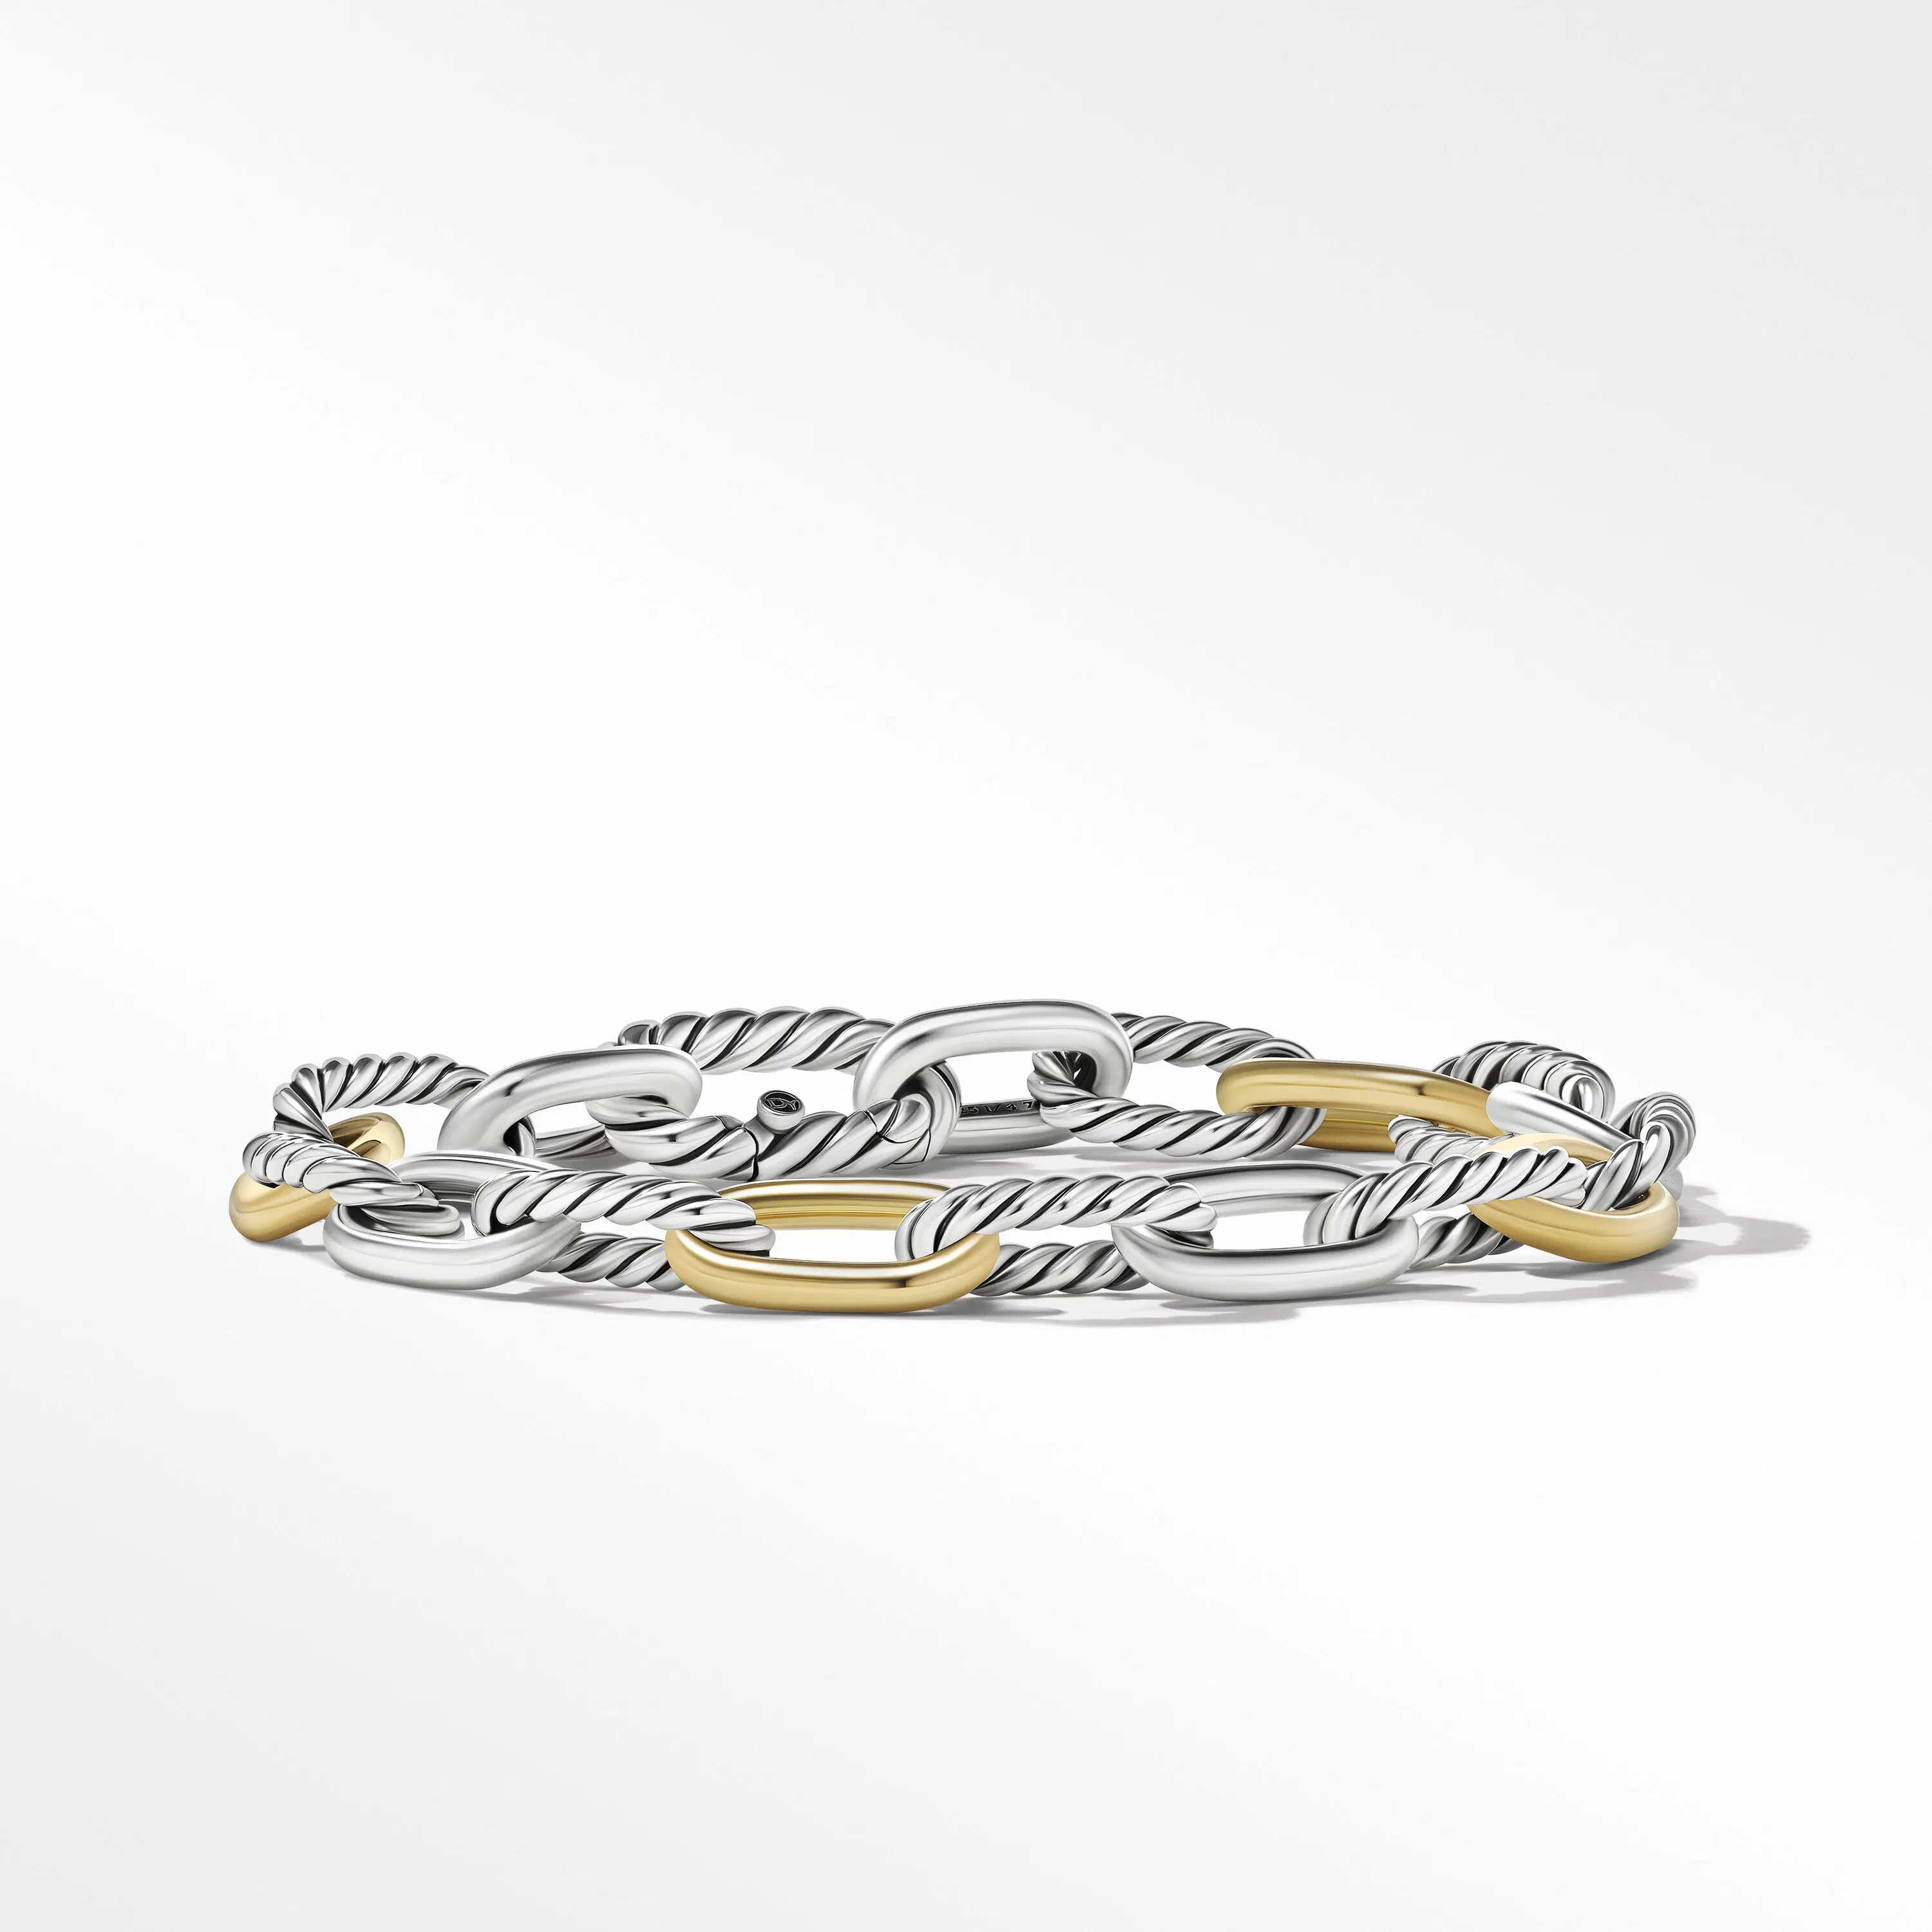 David Yurman DY Madison Chain 8.5mm Bracelet in Sterling Silver with 18k Yellow Gold, size large